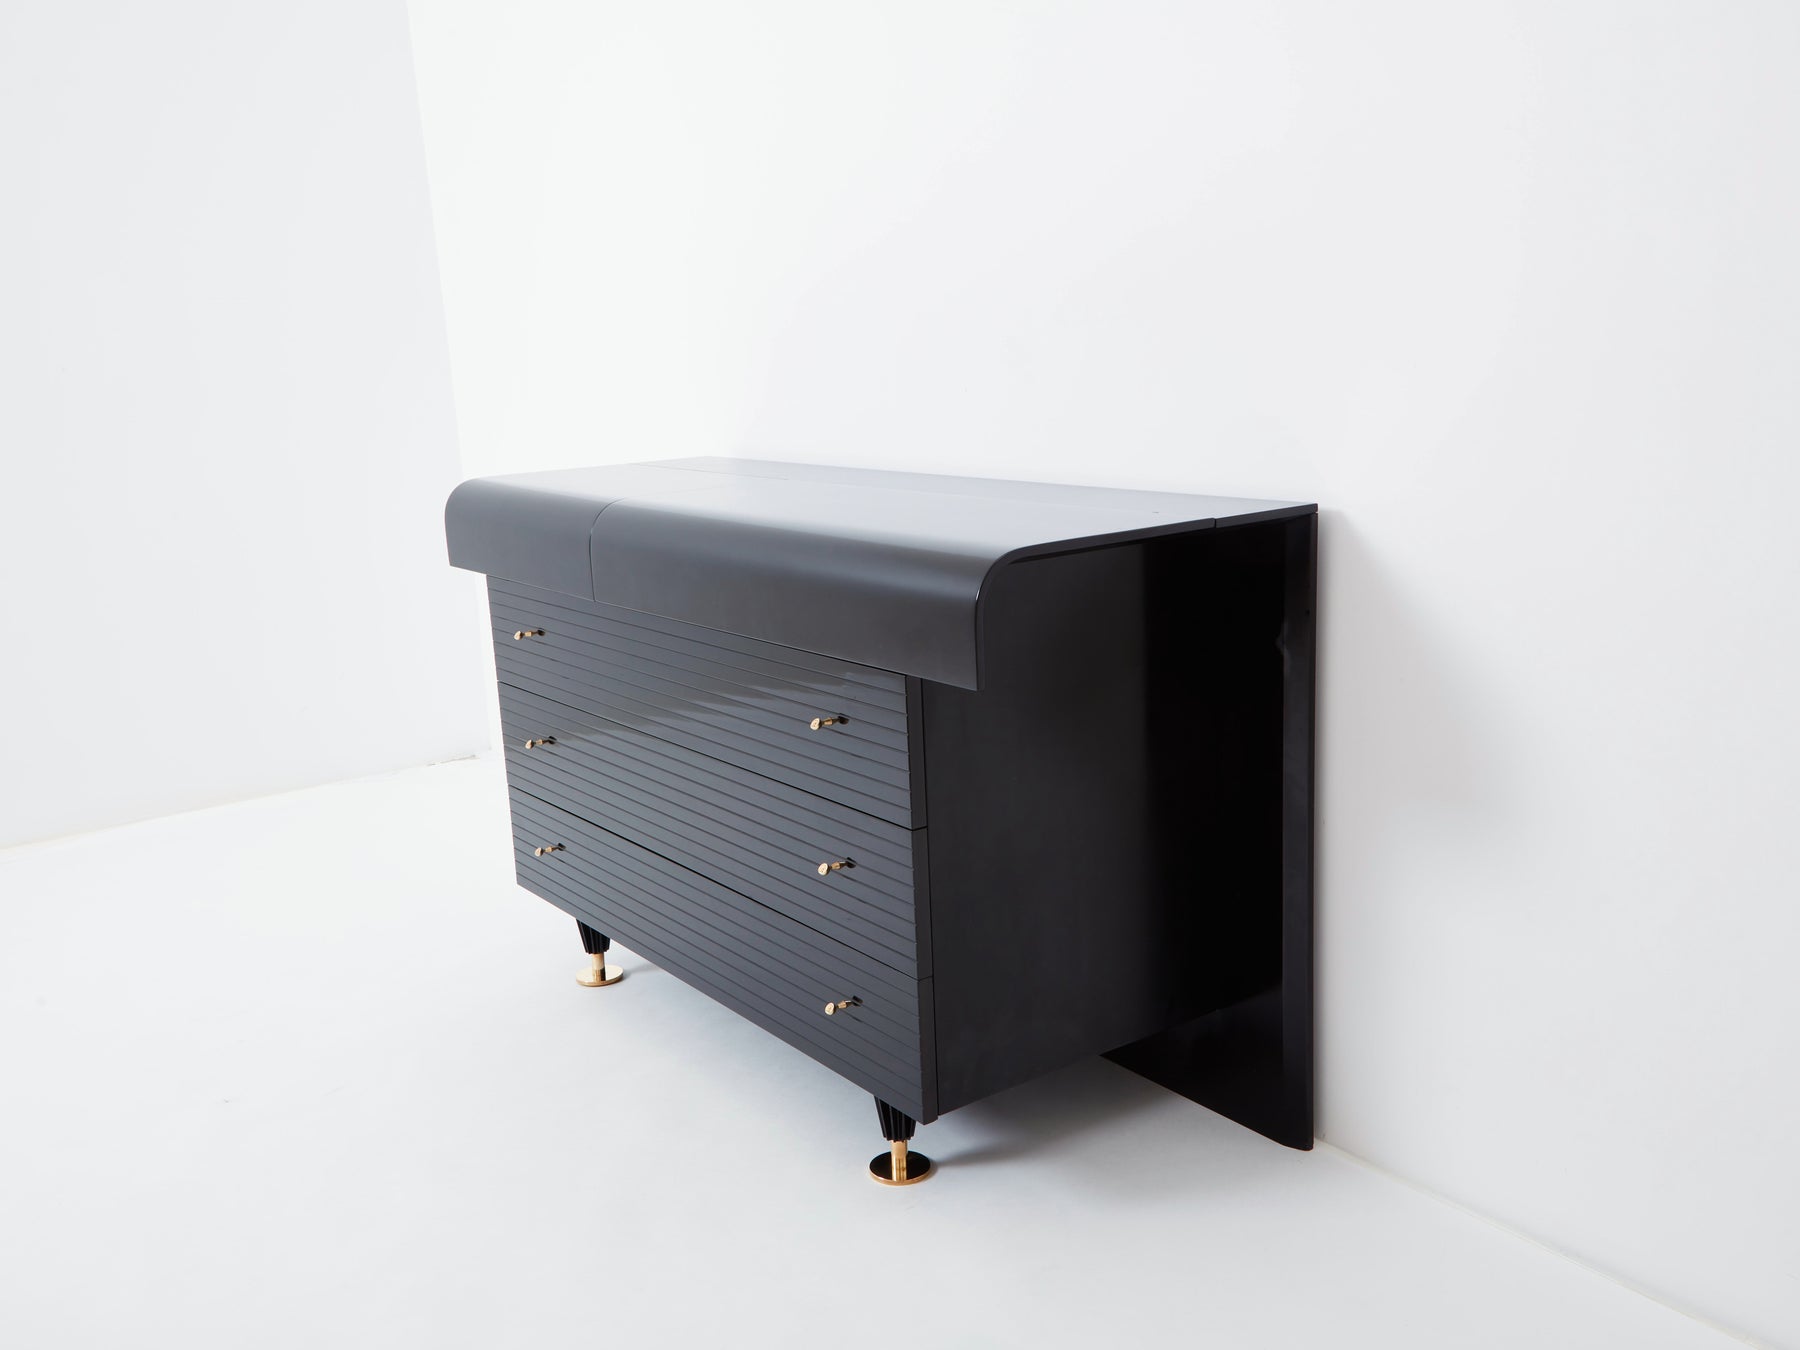 Pierre Cardin signed commode black lacquered and brass 1980s